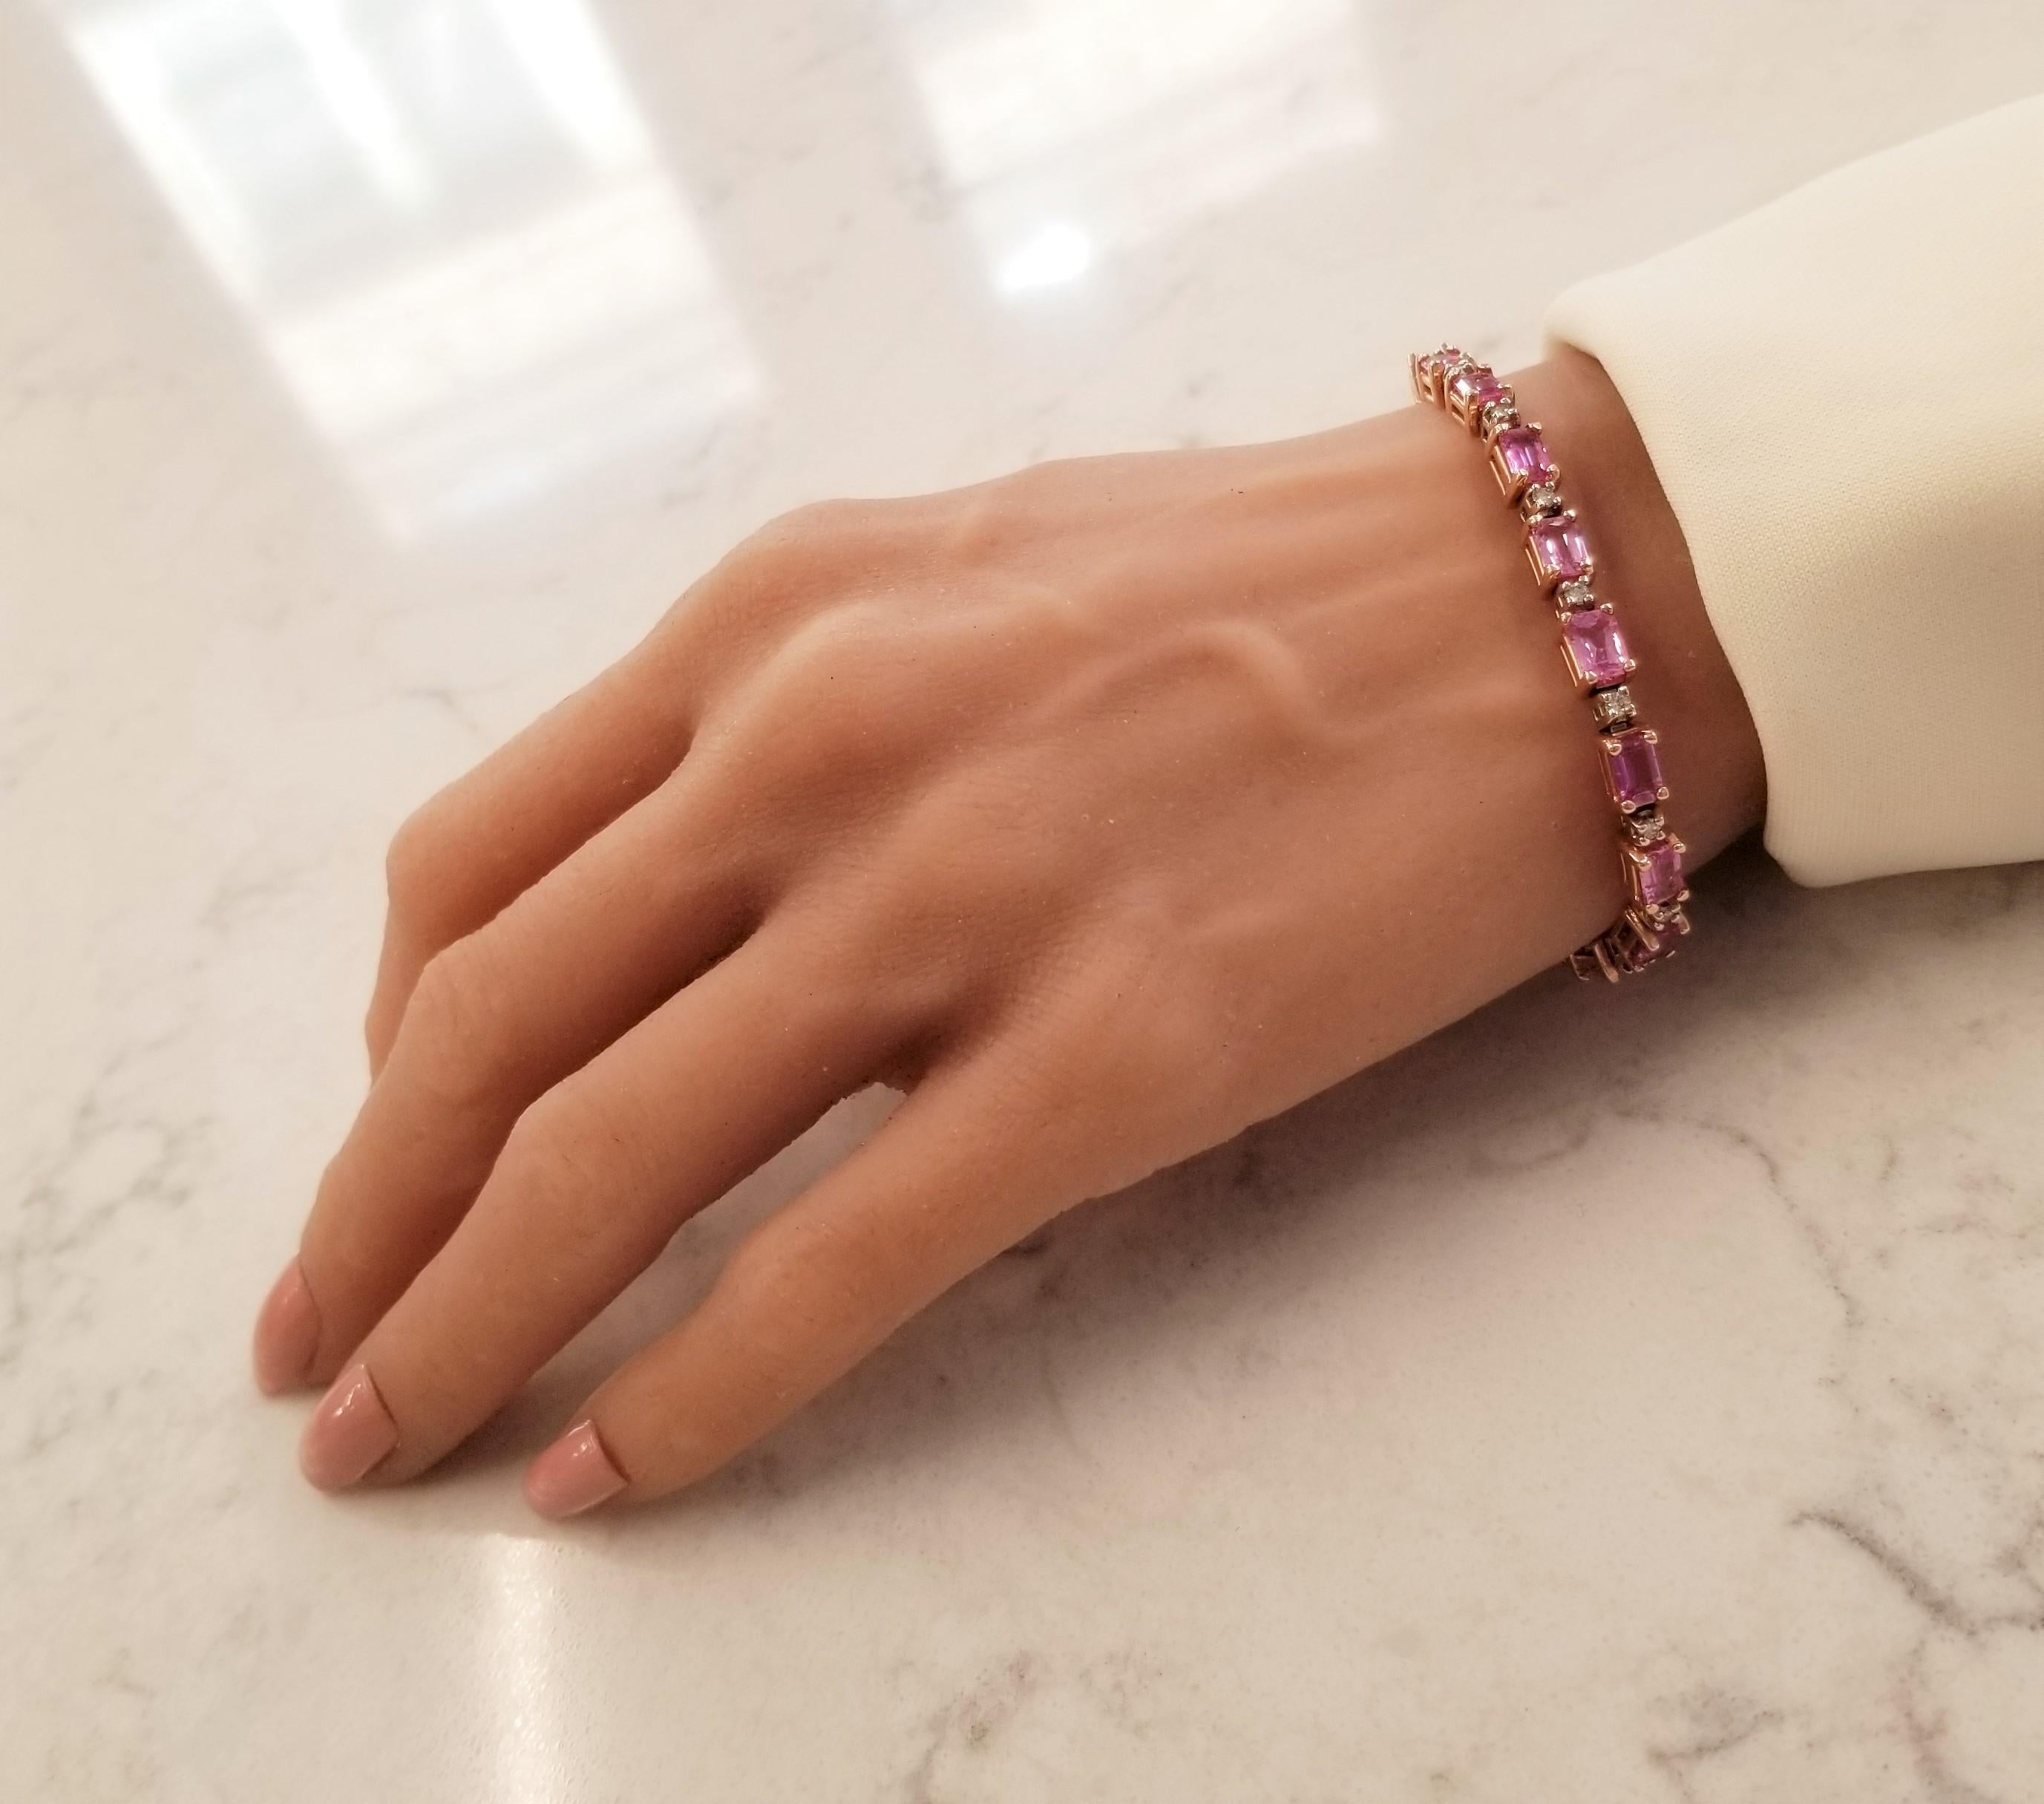 This is a pink sapphire and diamond bracelet. The beauty of the natural pink sapphires is its color: rose pink. The sapphires source is Sri Lanka. The pinks are perfectly matched in size, color, and luster. This wonderful bracelet features 10.85